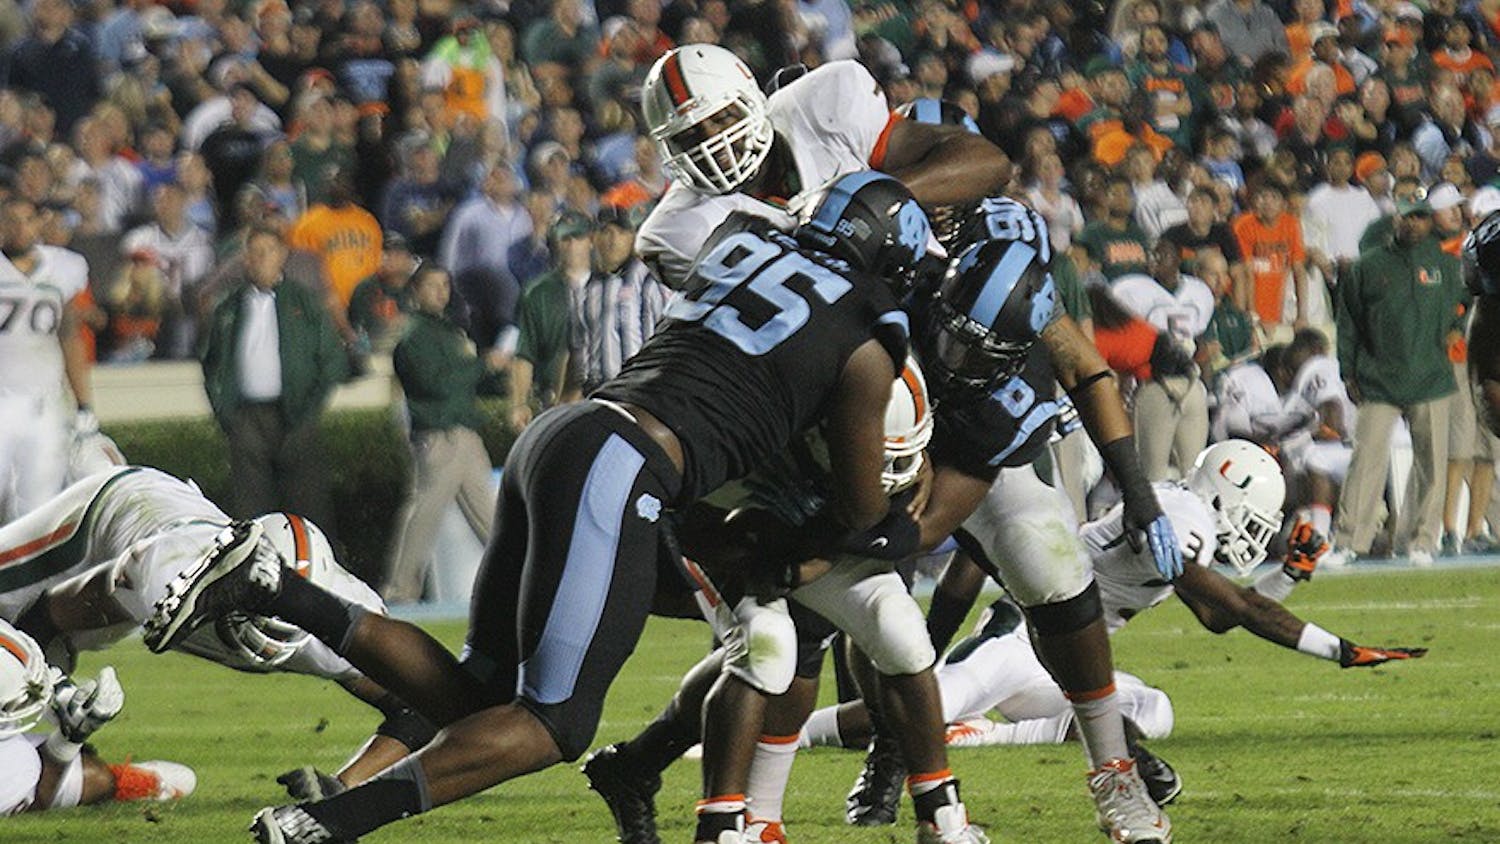 	Kareem Martin (95), a senior defensive end, assists a teammate in tackling a player during the game against Miami on Oct. 17. Martin won the ACC’s defensive lineman of the week for his performance.